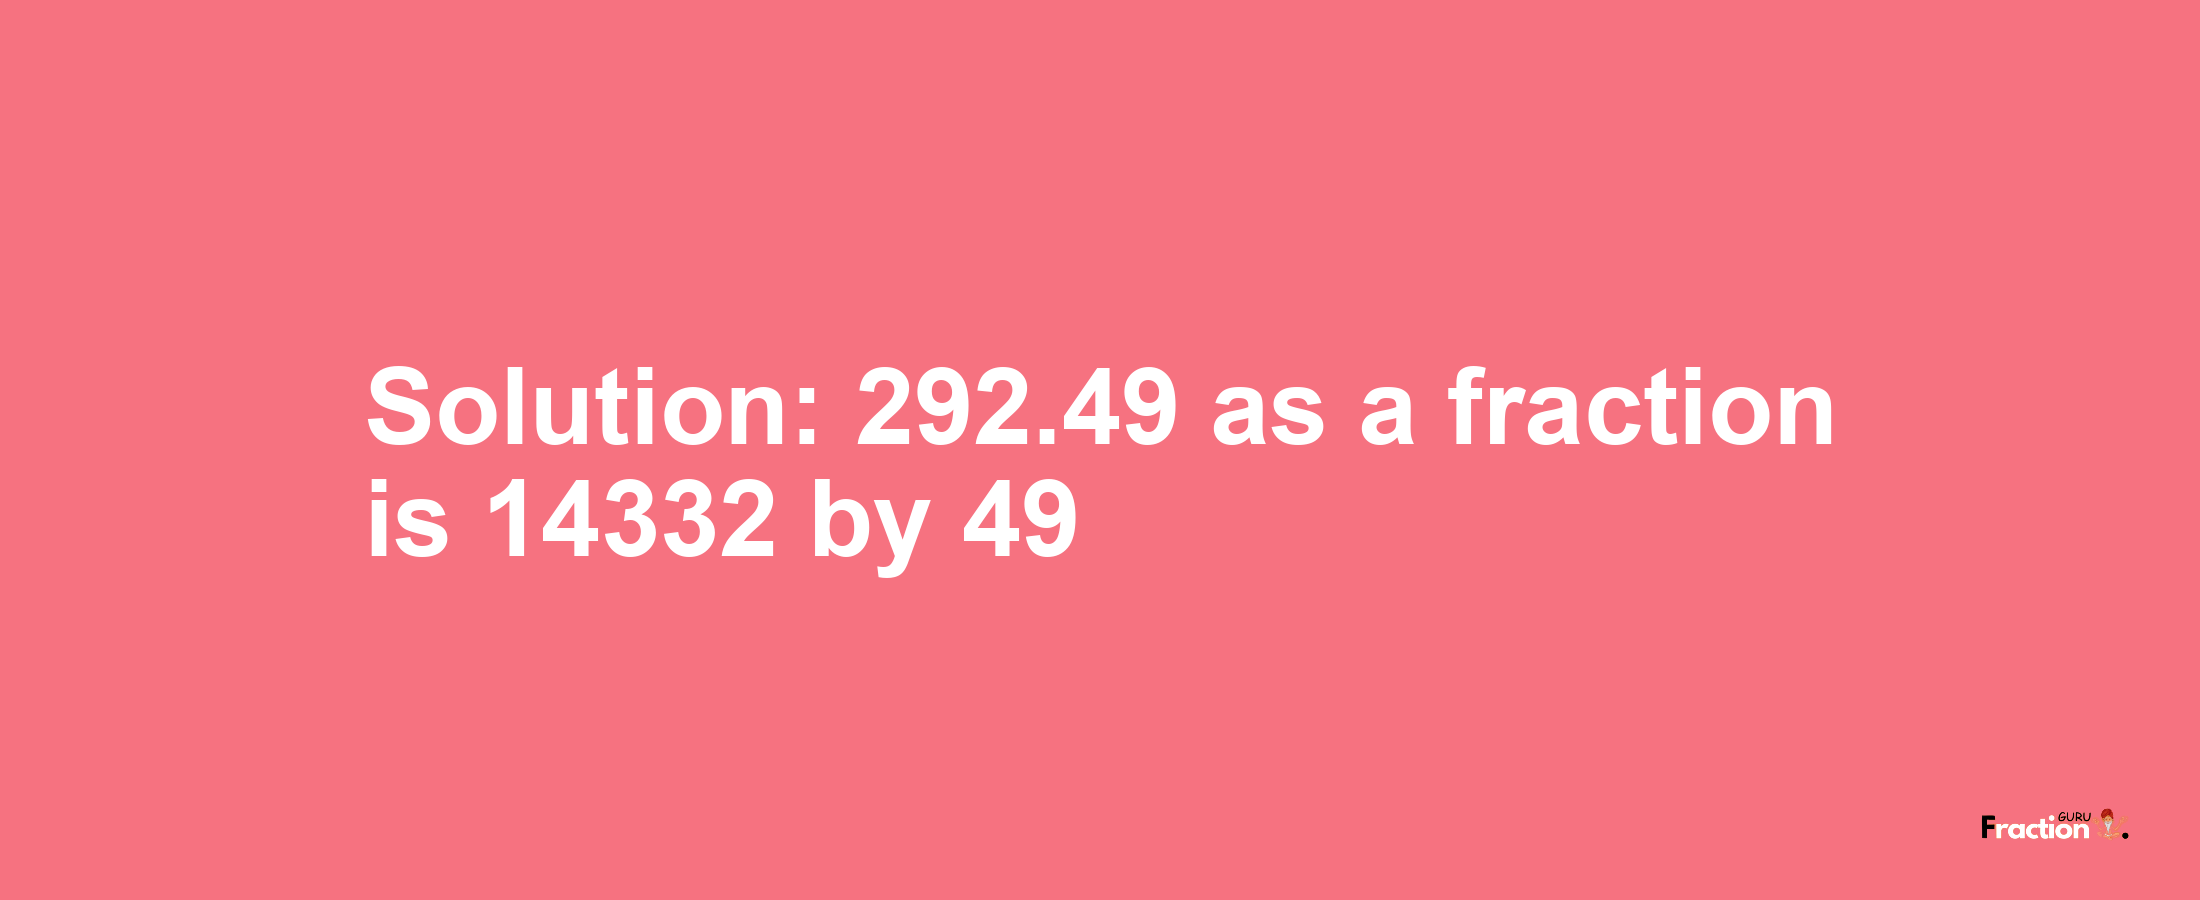 Solution:292.49 as a fraction is 14332/49